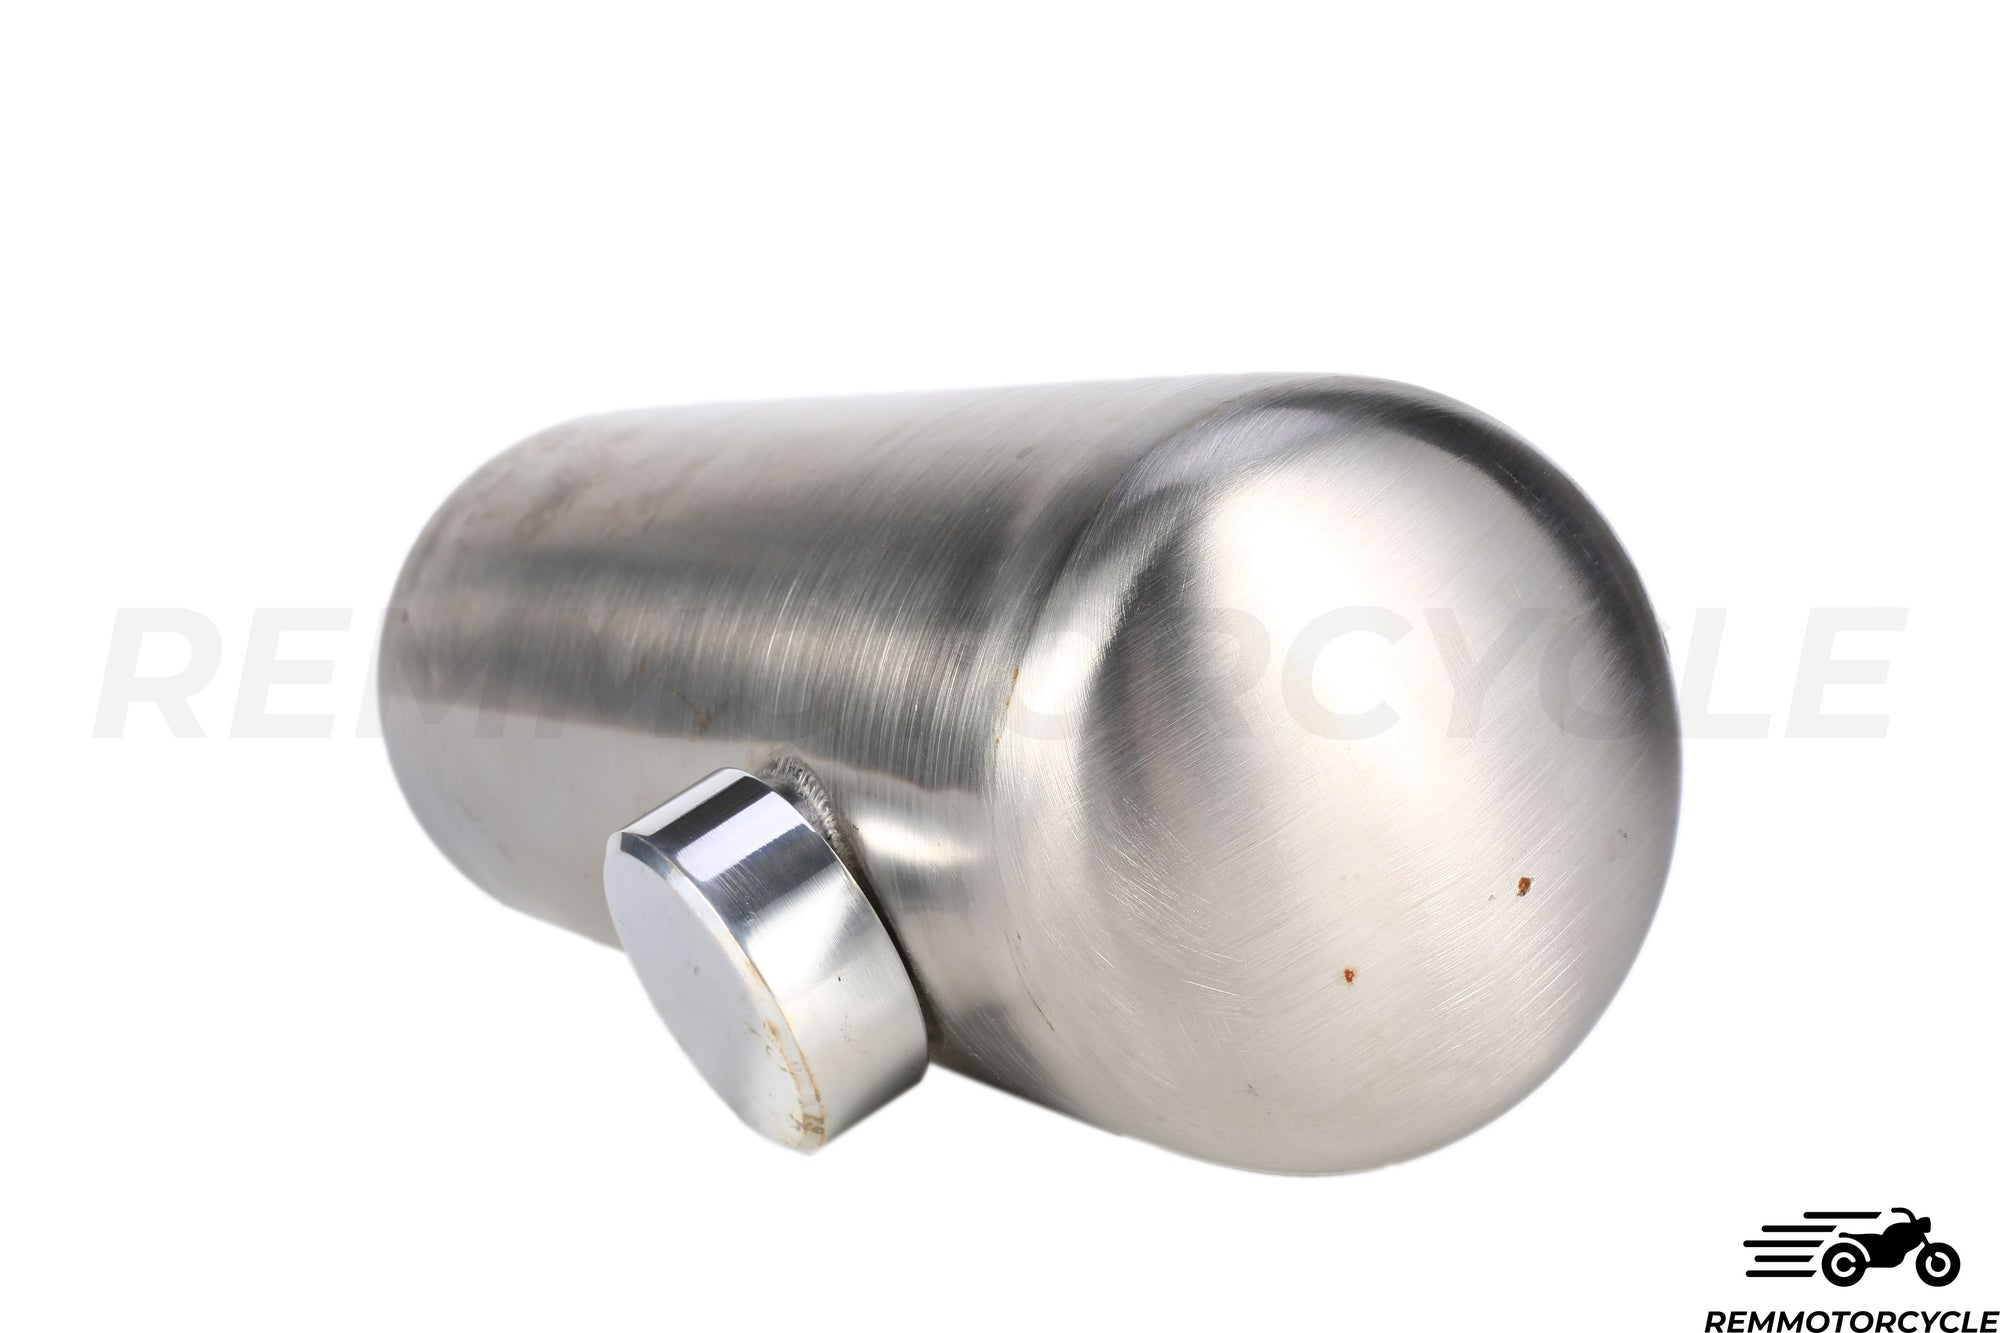 Additional stainless steel motorcycle tank 2 L